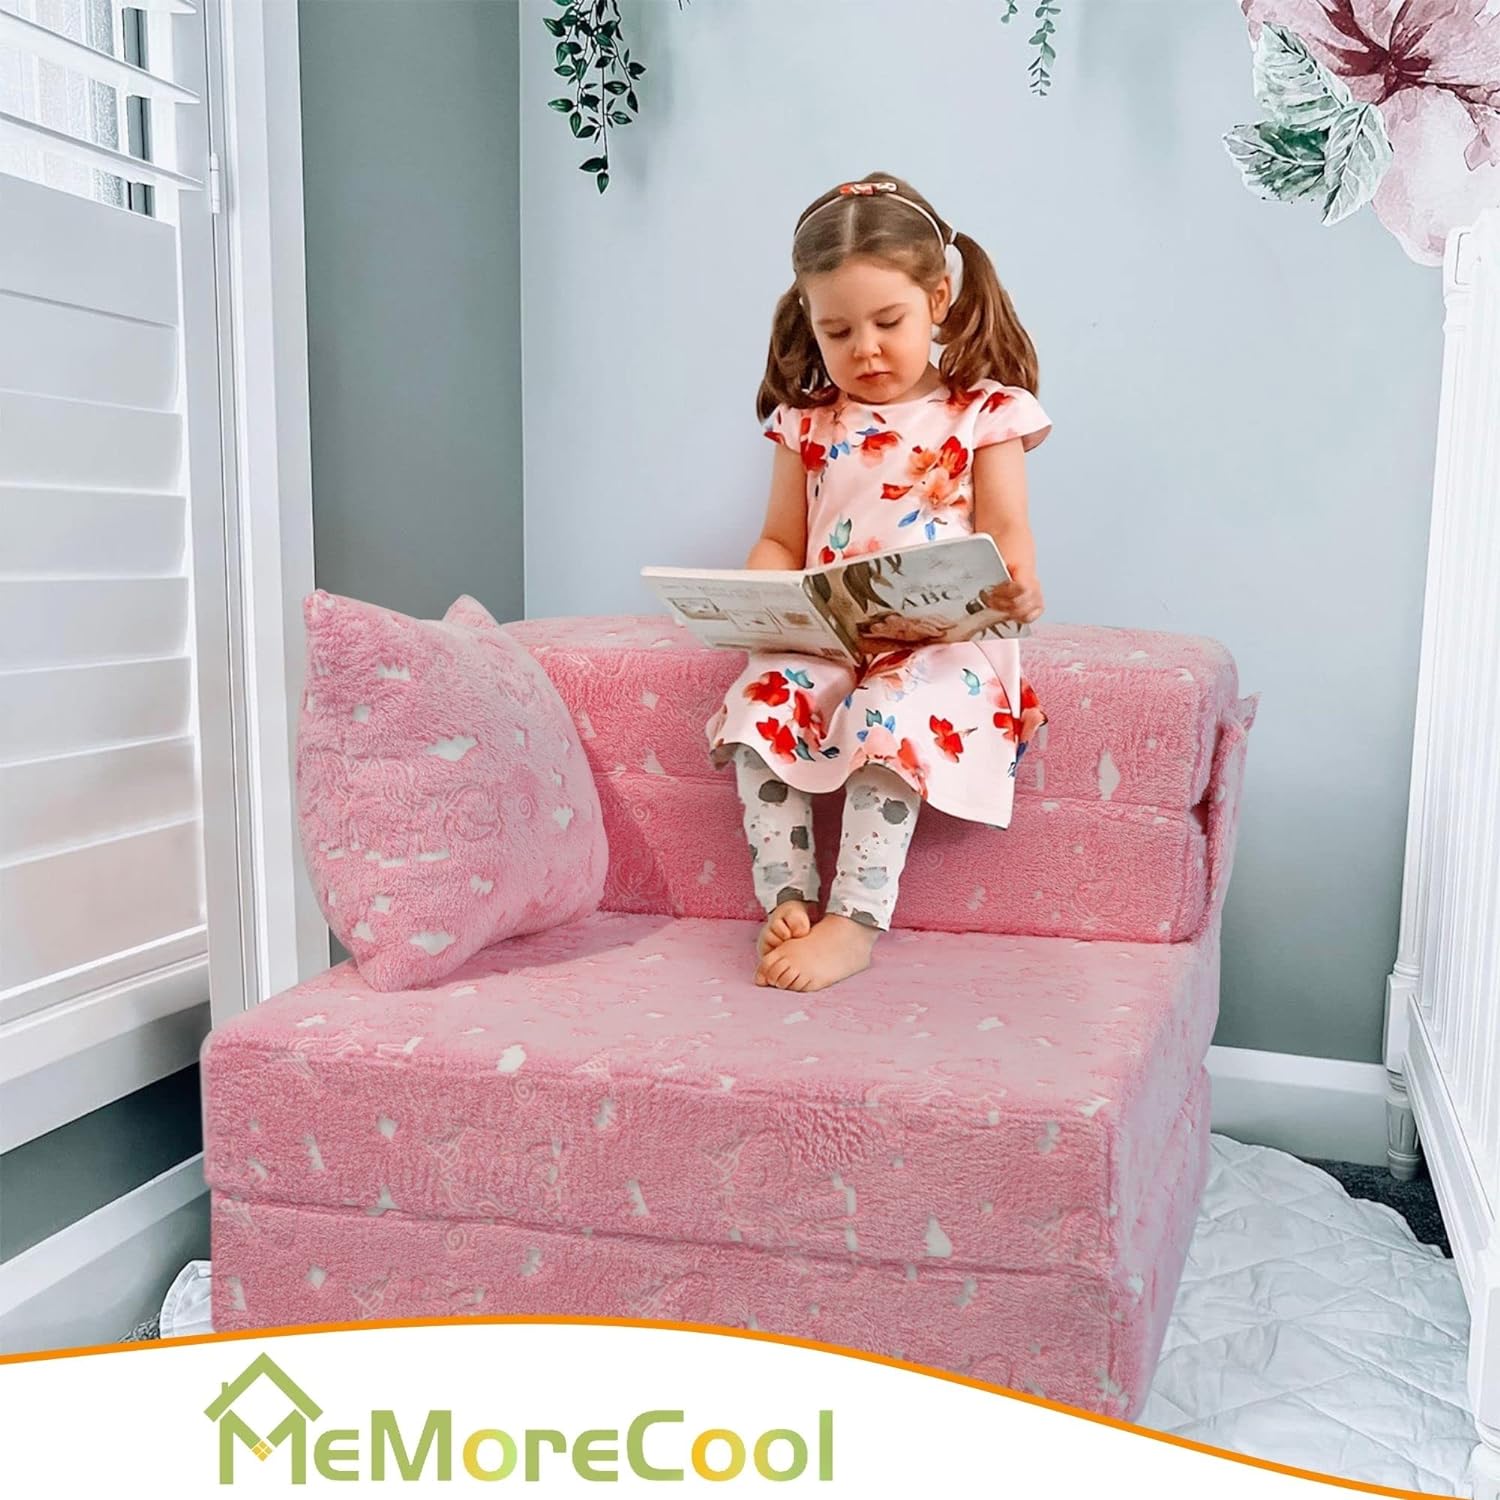 MeMoreCool Kids Couch, Foam Sofa, Convertible Play Couch, Pink, 8 Piece  Modular